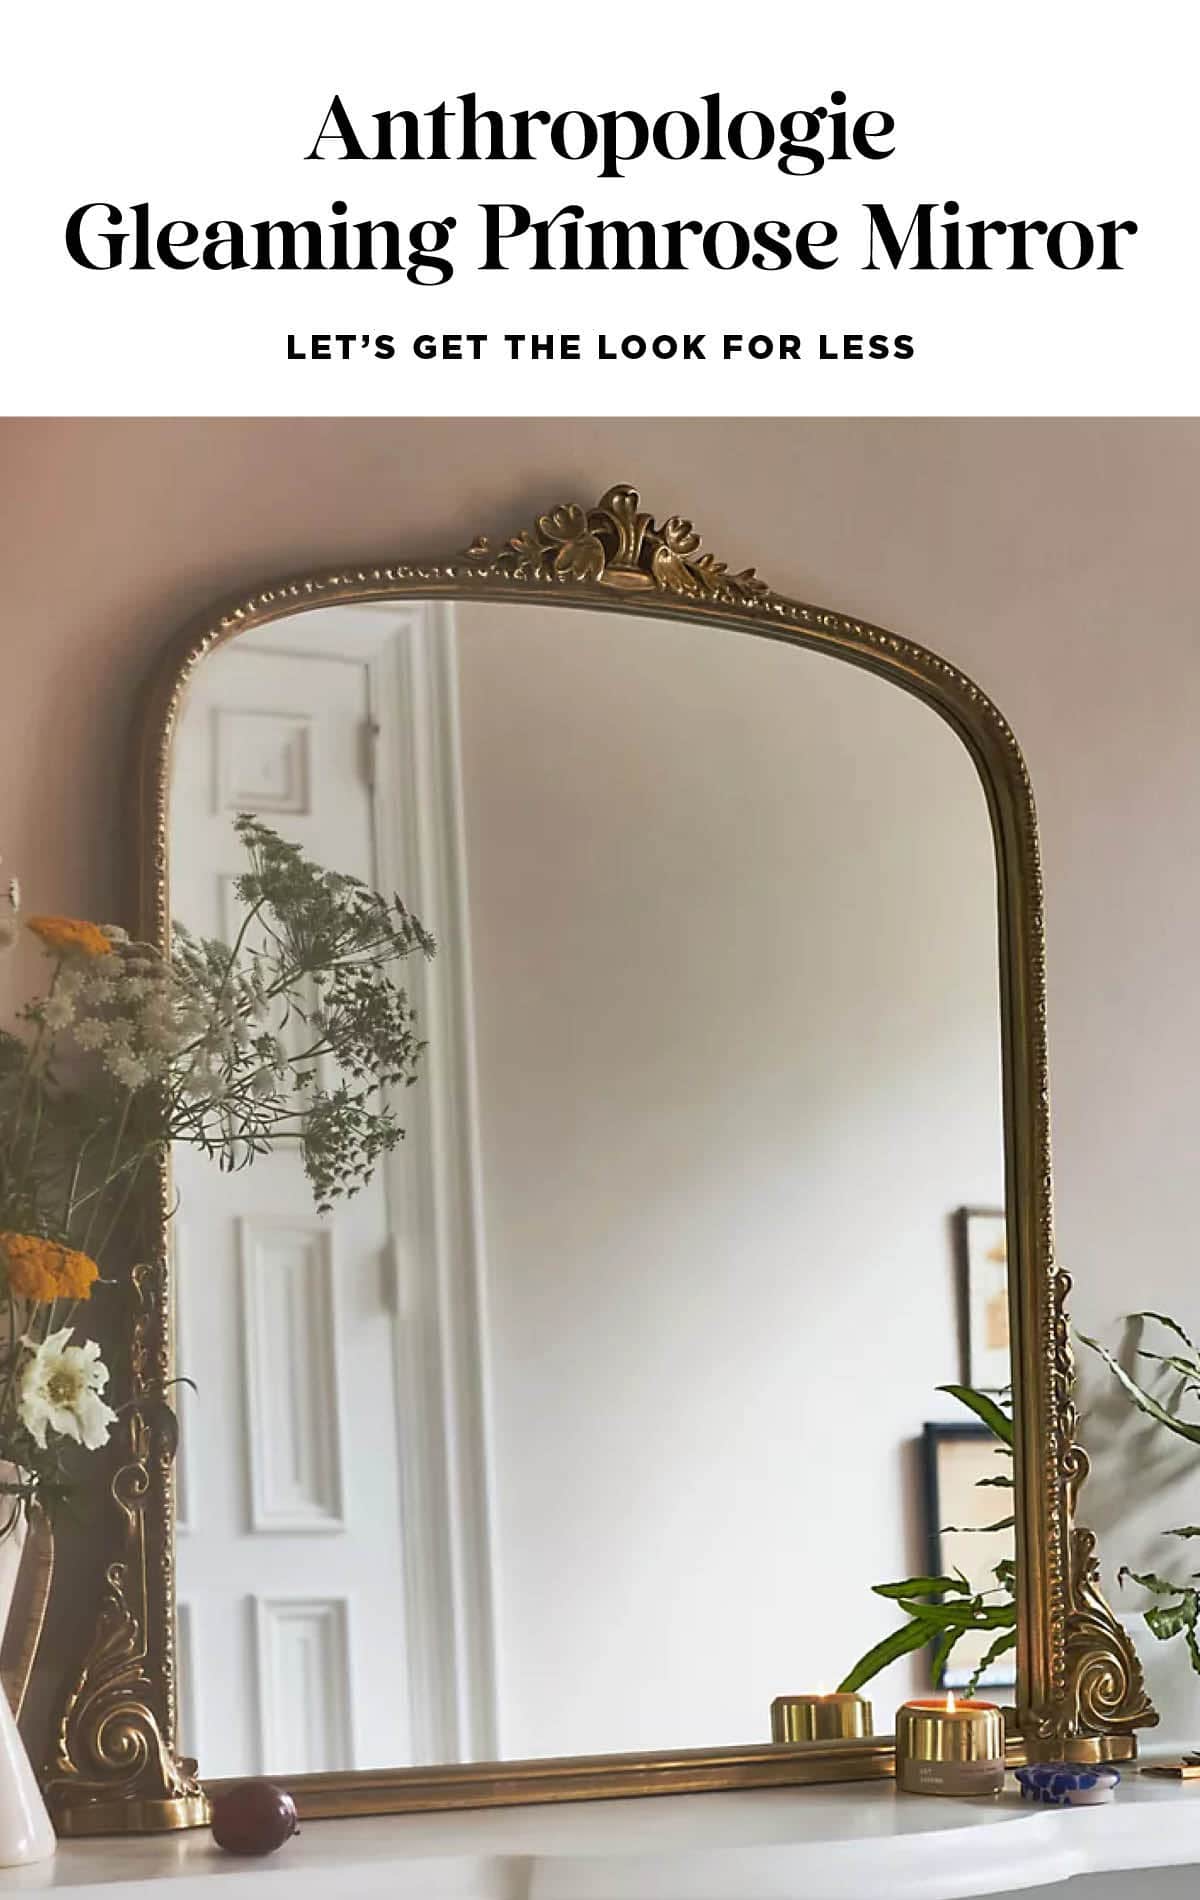 Best Anthropologie Mirror Dupe - Best Anthropologie mirror dupe! Get the look for less with these stunning mirror dupes — a touch of elegance without breaking the bank.